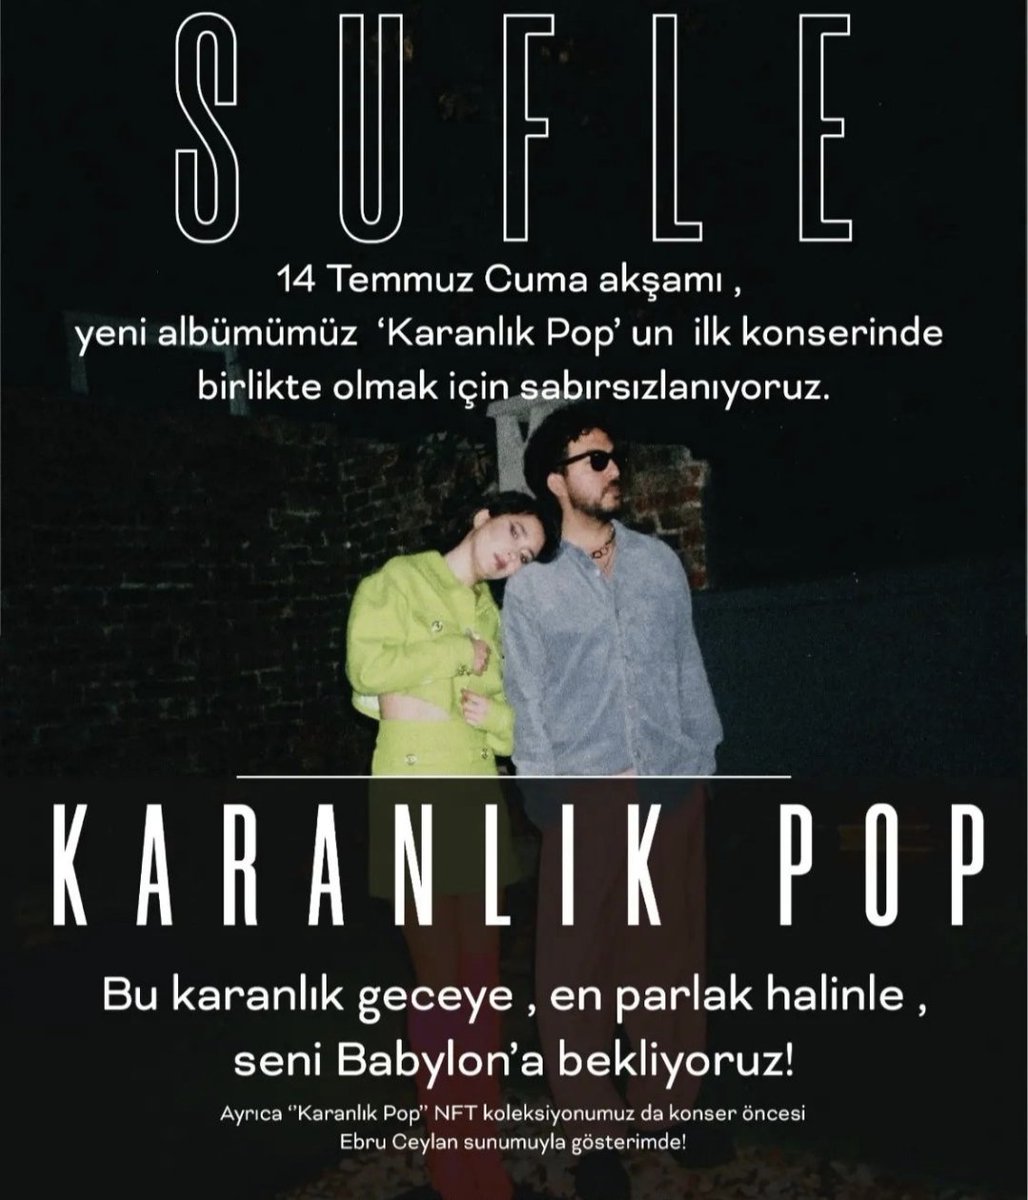 Upcoming Drop 🔥🔥 @niftygateway Karanlık Pop by Sufle @Sufleband 🎵🎙️🎸🎼 Sufle is one of Turkey's leading alternative pop bands. The band captivates audiences with their melancholic and sad sound, powerful lyrics and impressive stage performances. Göksu Taşçeviren's deep and…